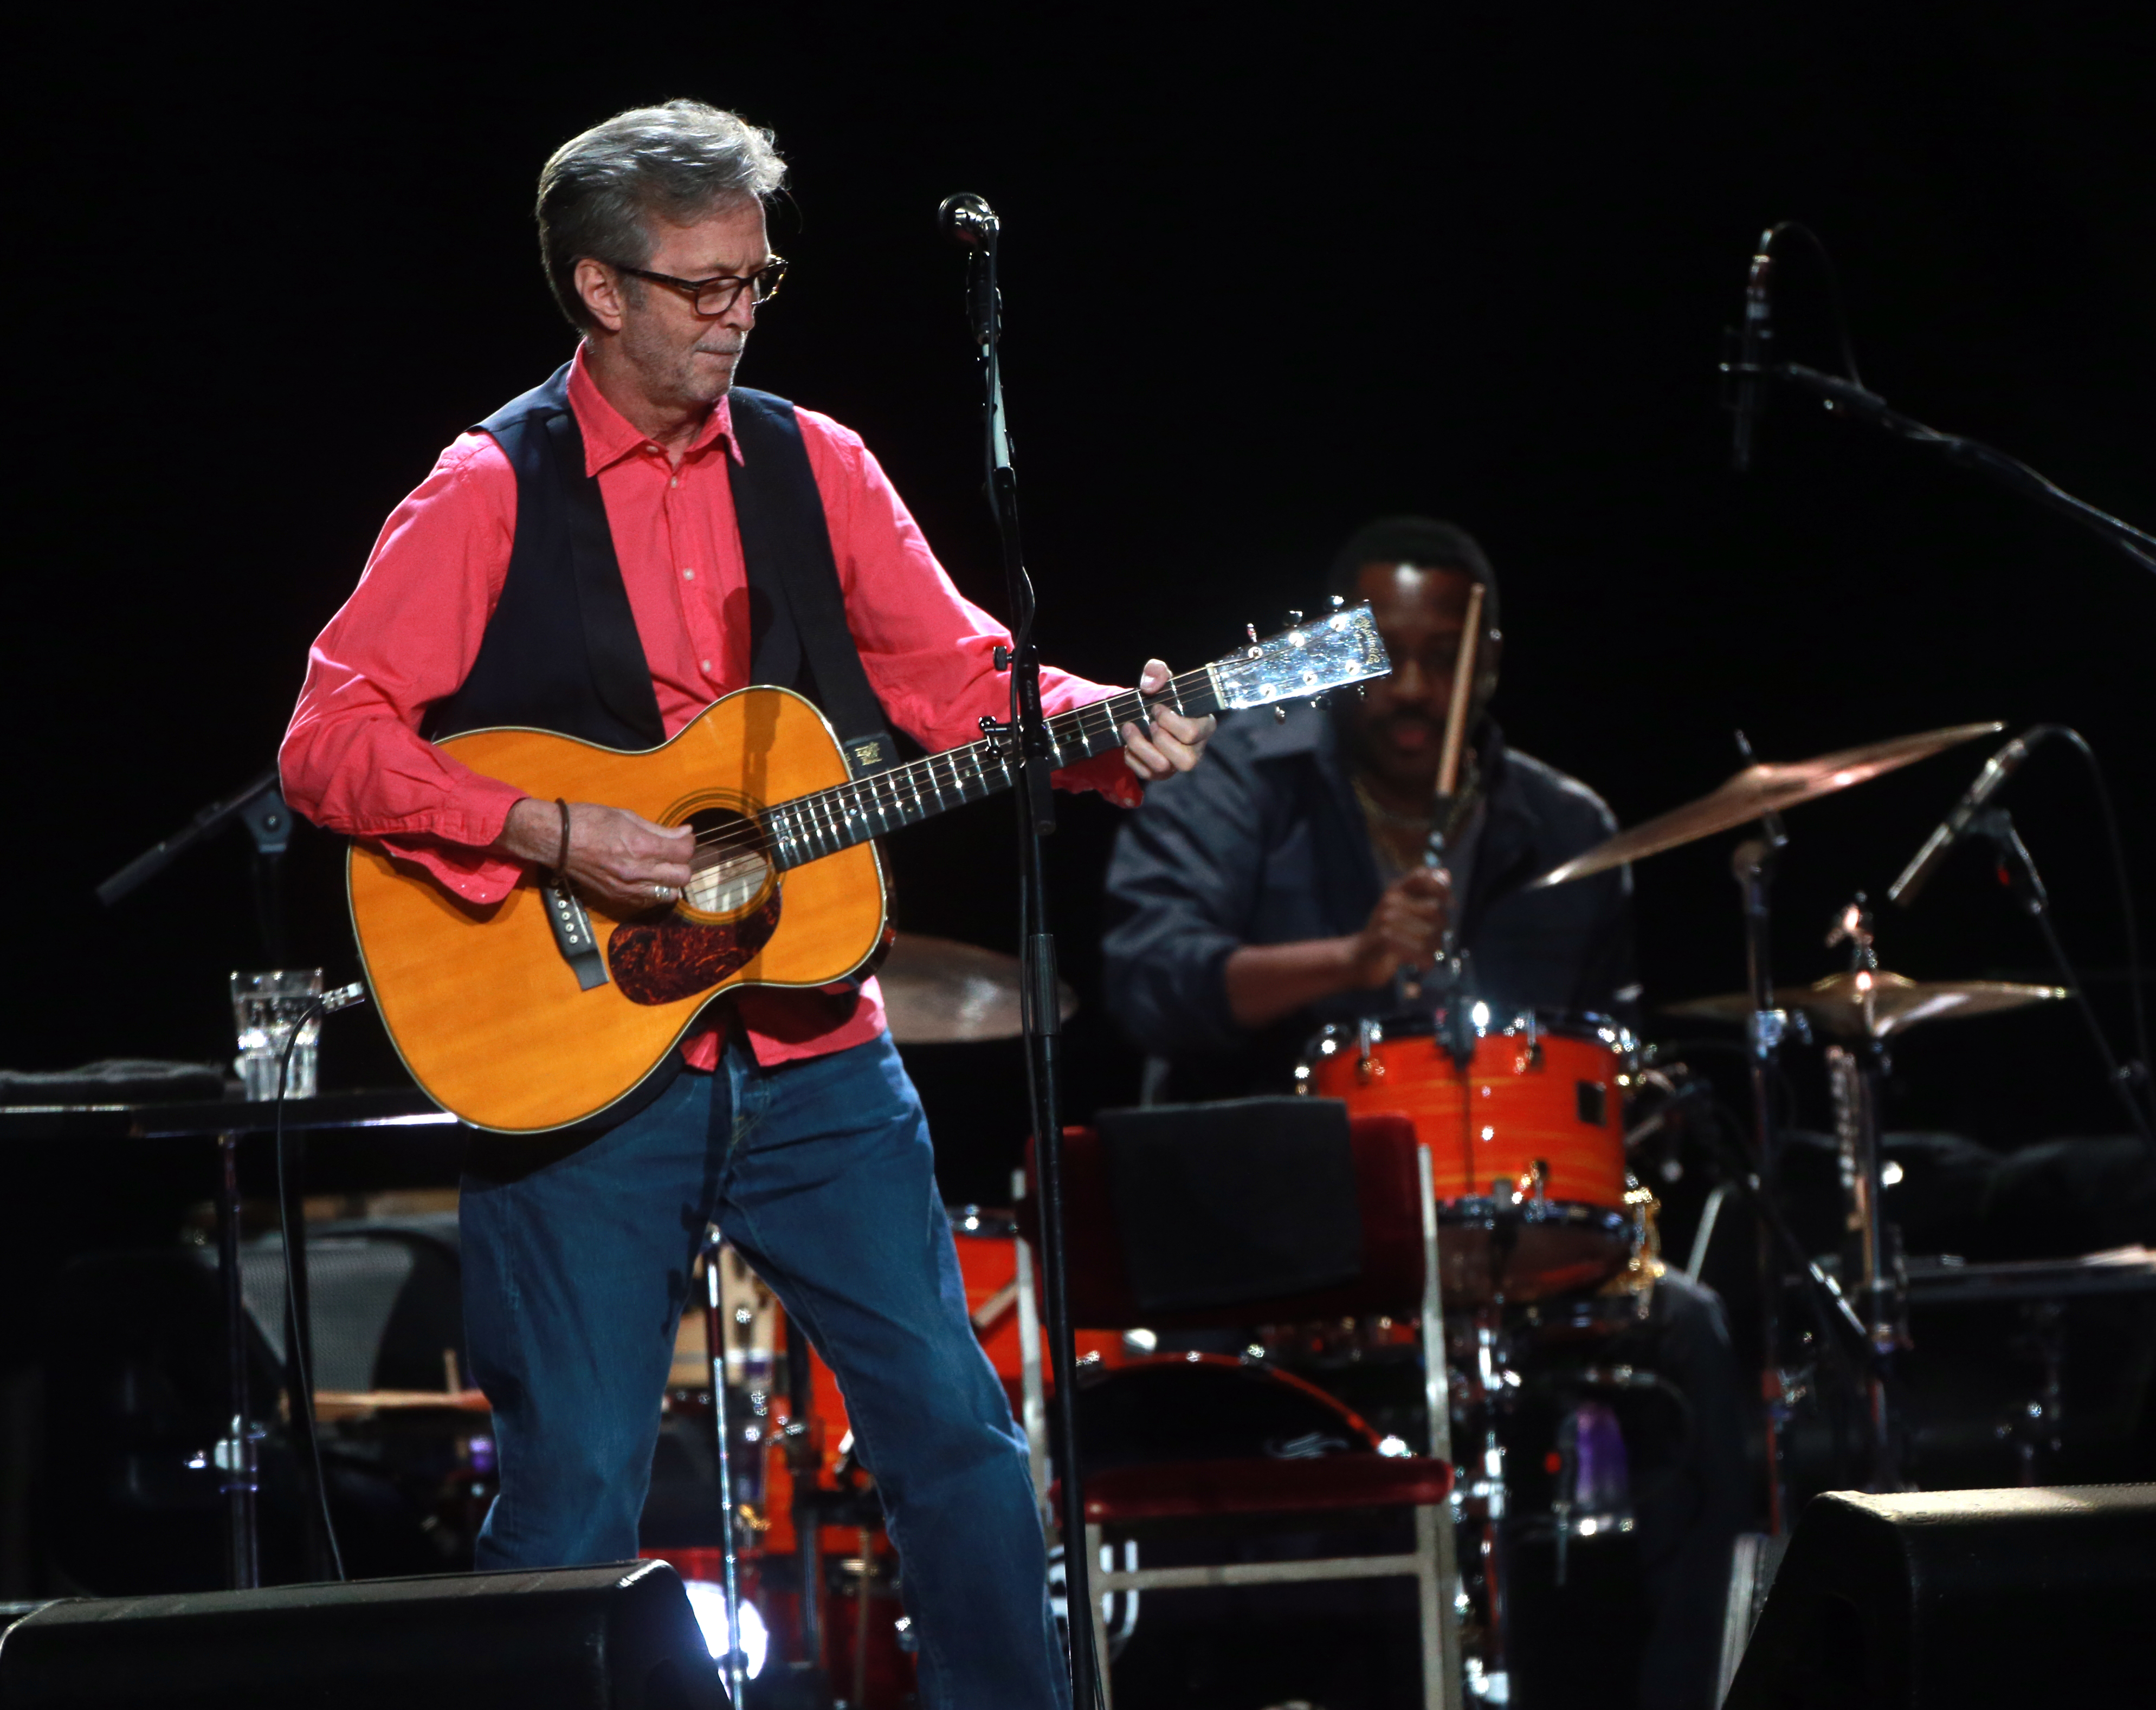 Eric Clapton opens U.S. tour with lean, classy Fort Worth set